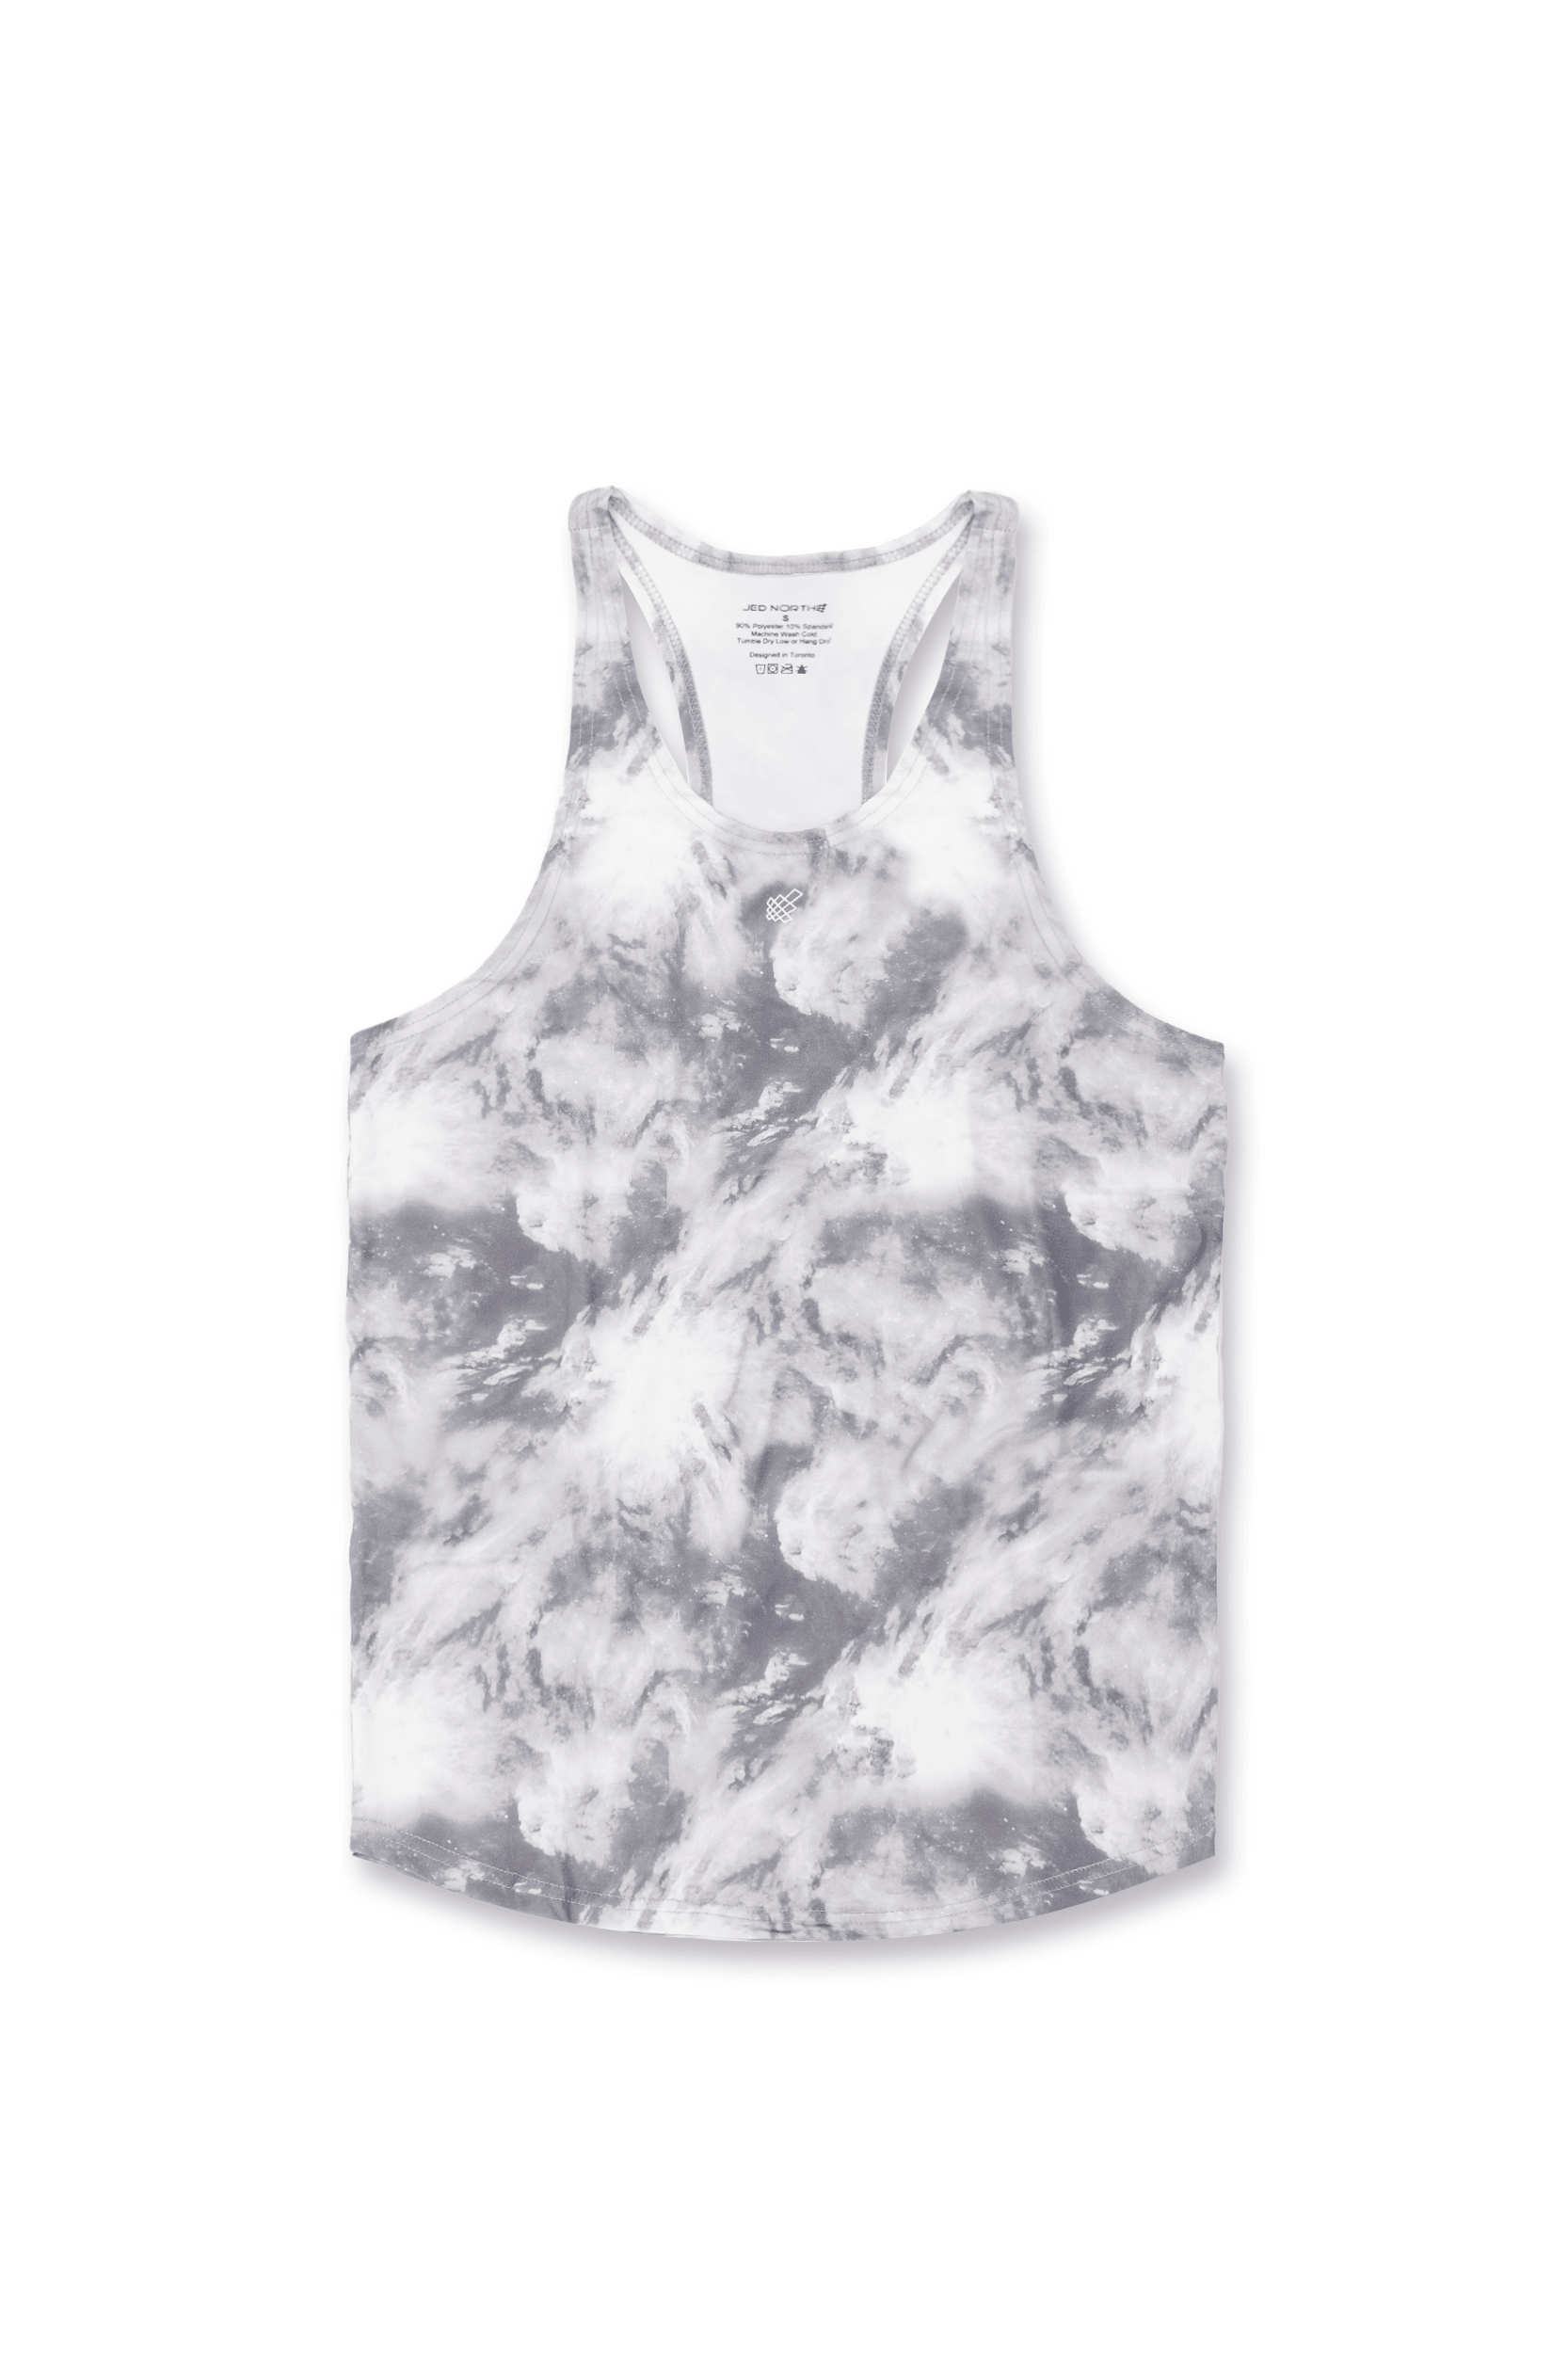 Old-School Workout Stringer - Tie Dye Gray - Jed North